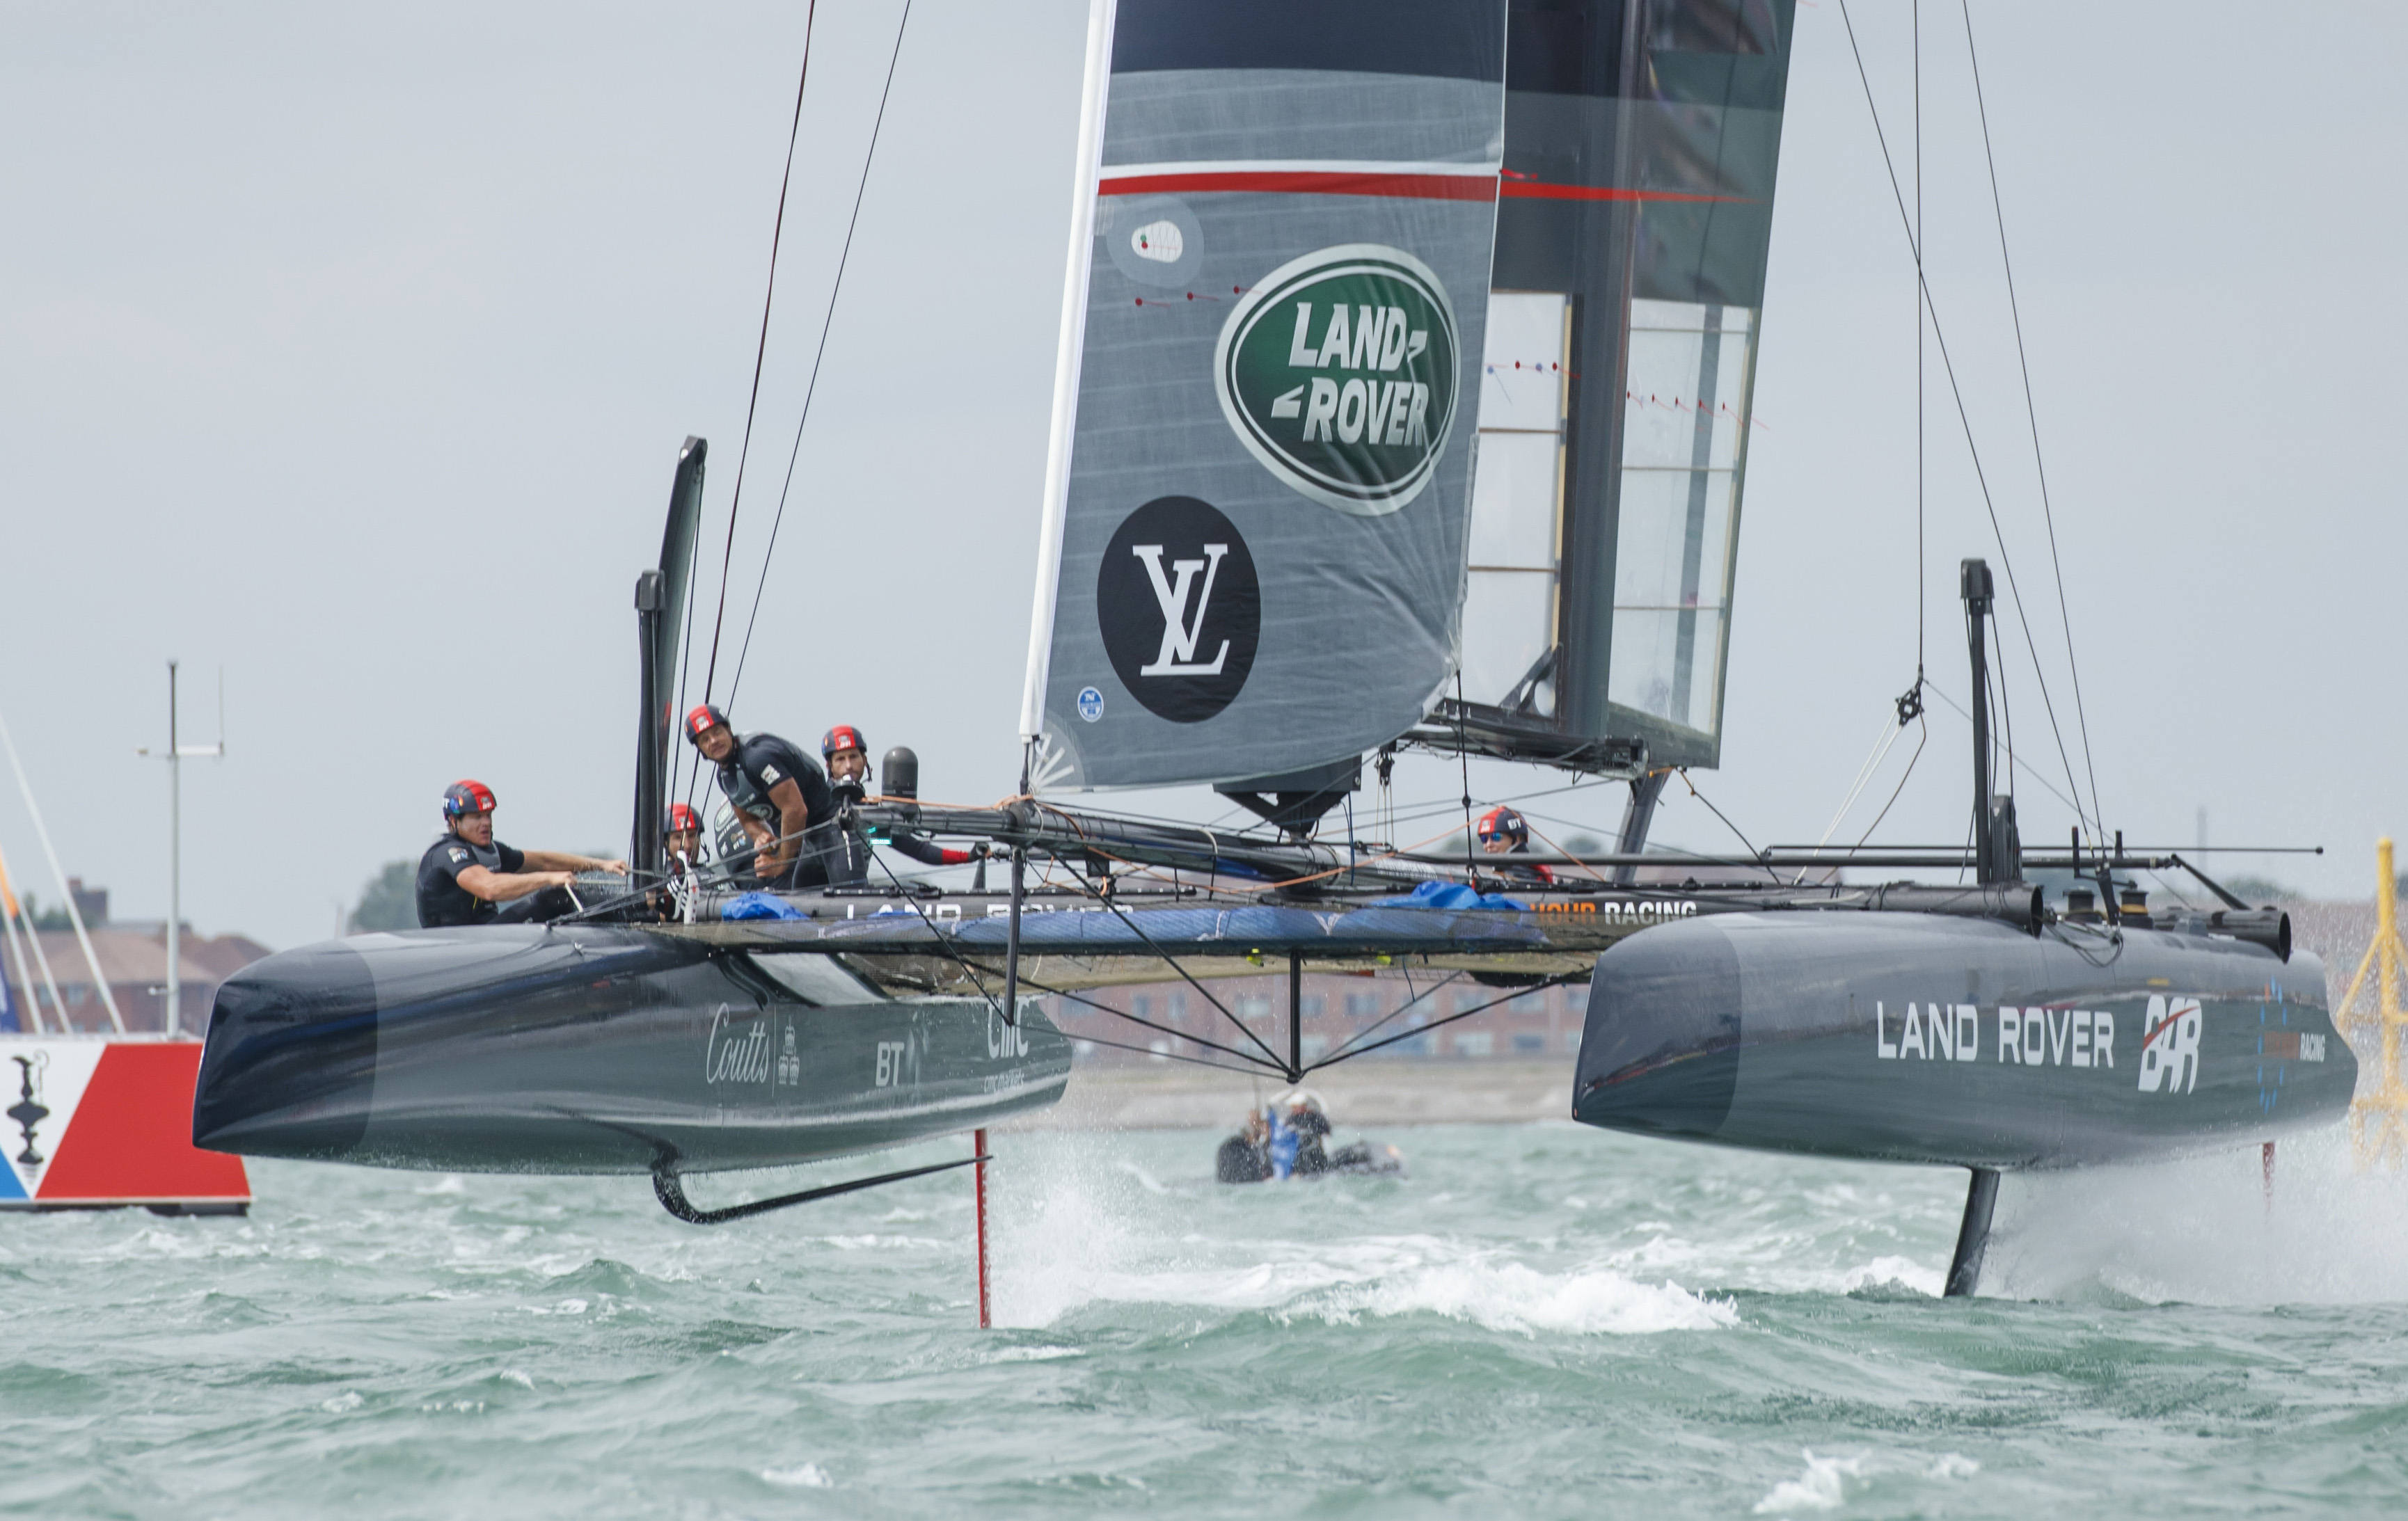 Ben Ainslie Racing Hopes IoT Can Help Win Britain's First America's Cup